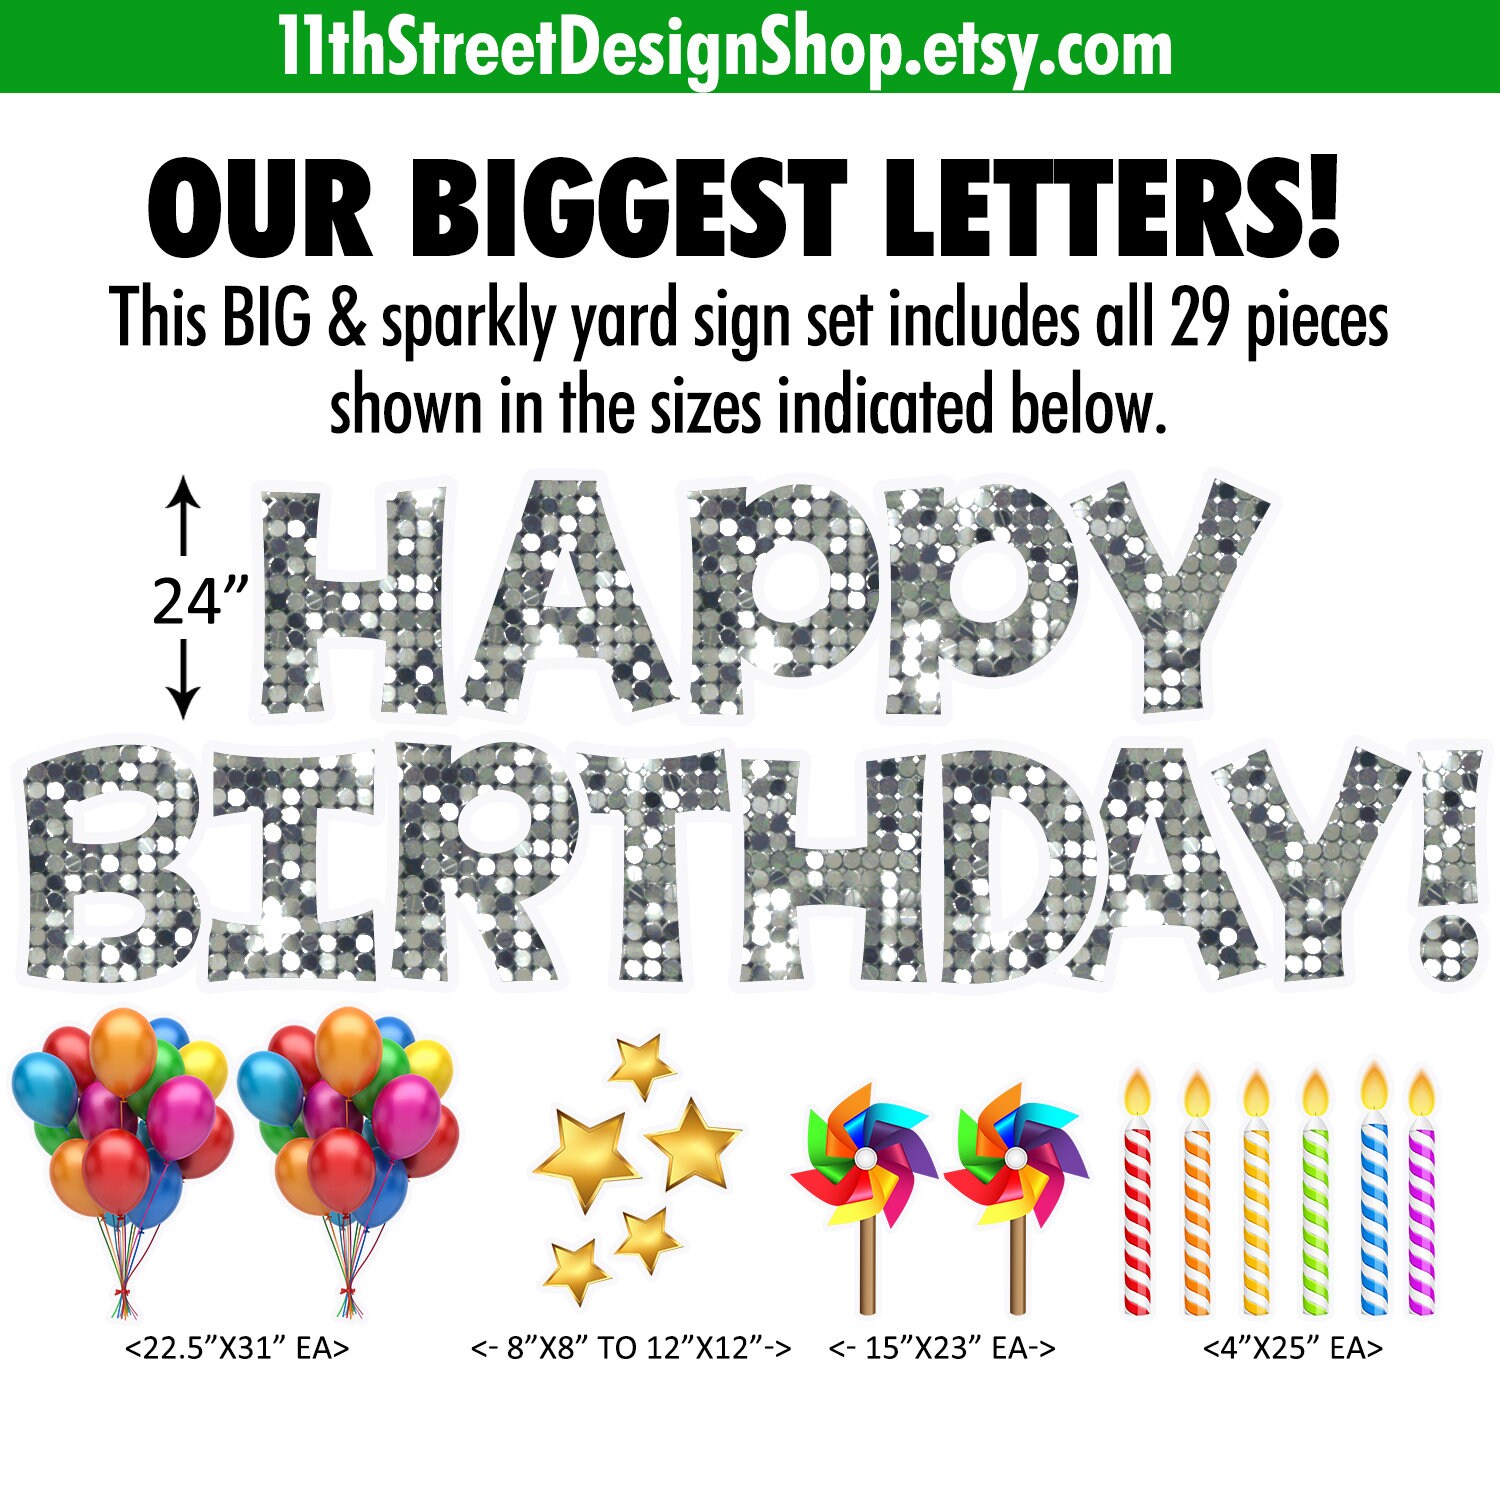 Birthday Party Lawn Greeting 24 Happy Birthday Yard Letters Yard Card Business Supplier 24 Letters BIG Silver Sparkles Lawn Decorations